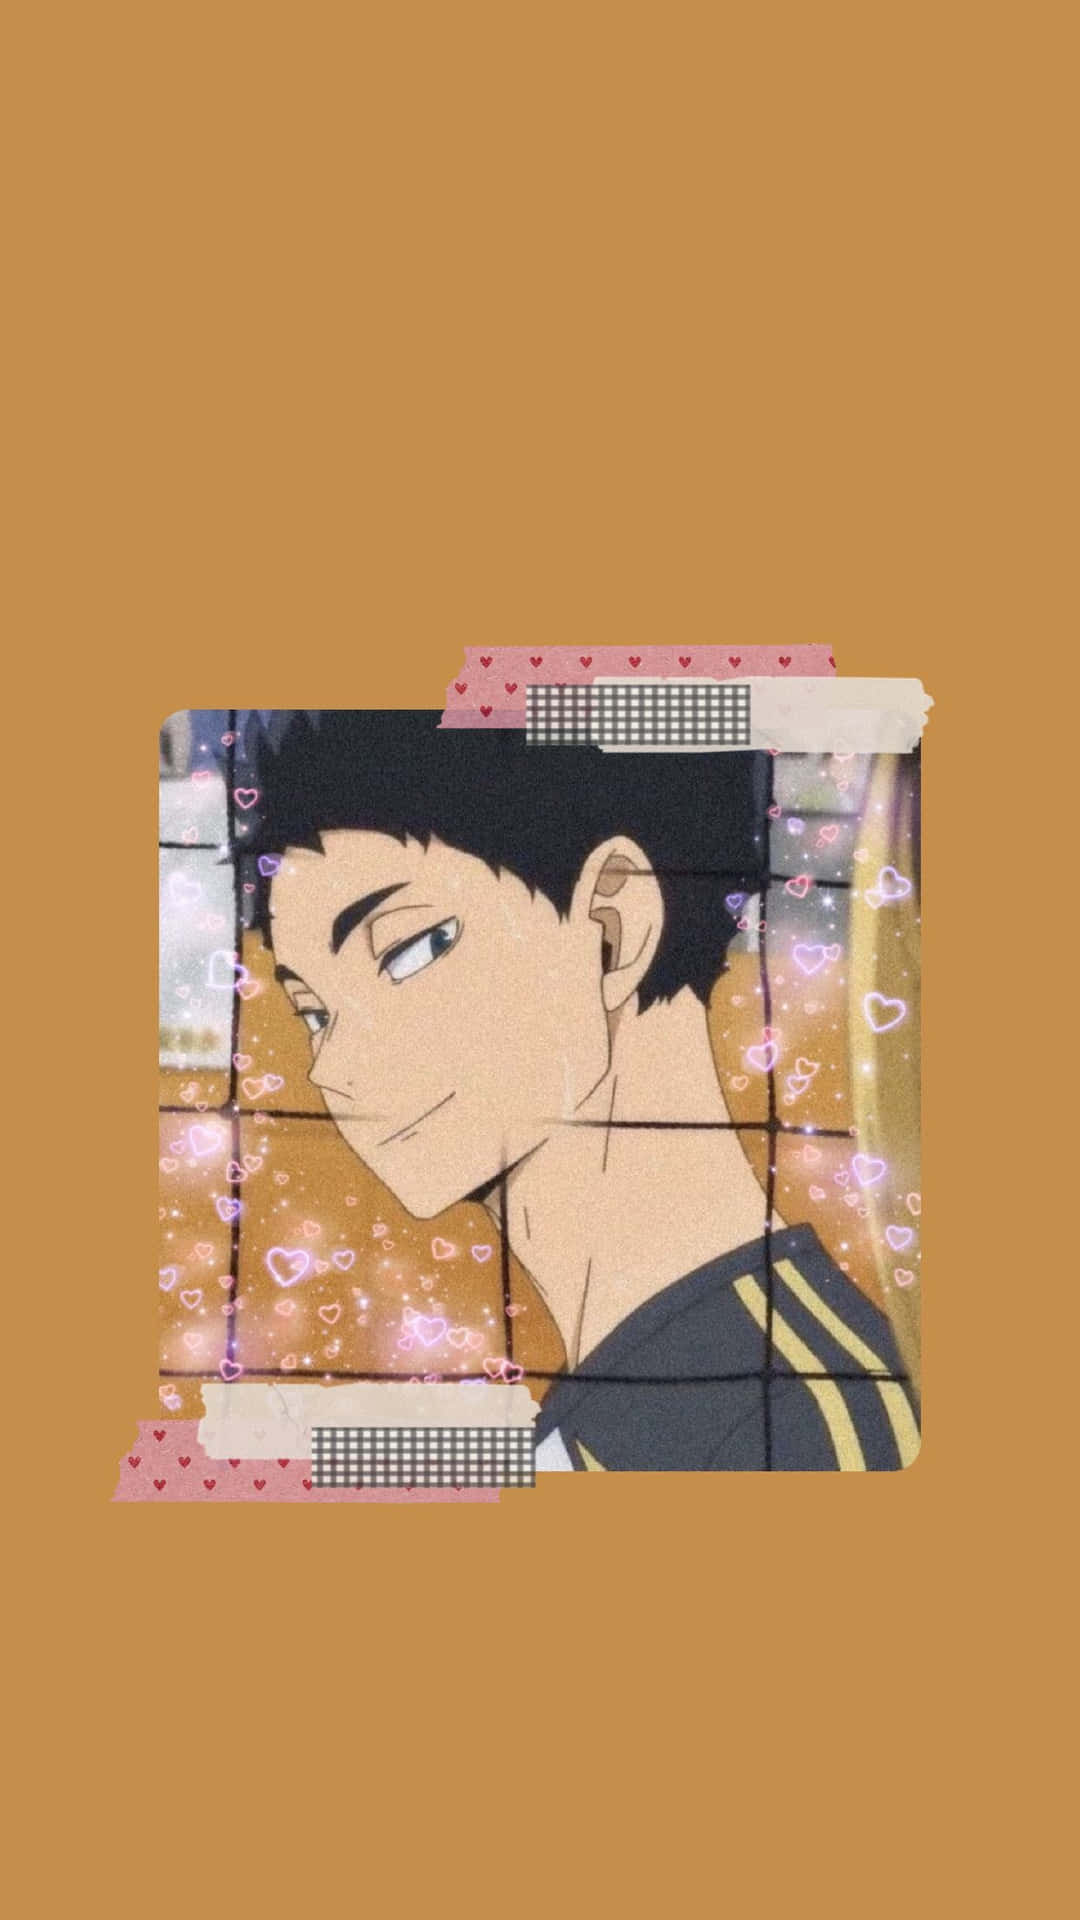 Keiji Akaashi deep in thought during a volleyball match Wallpaper